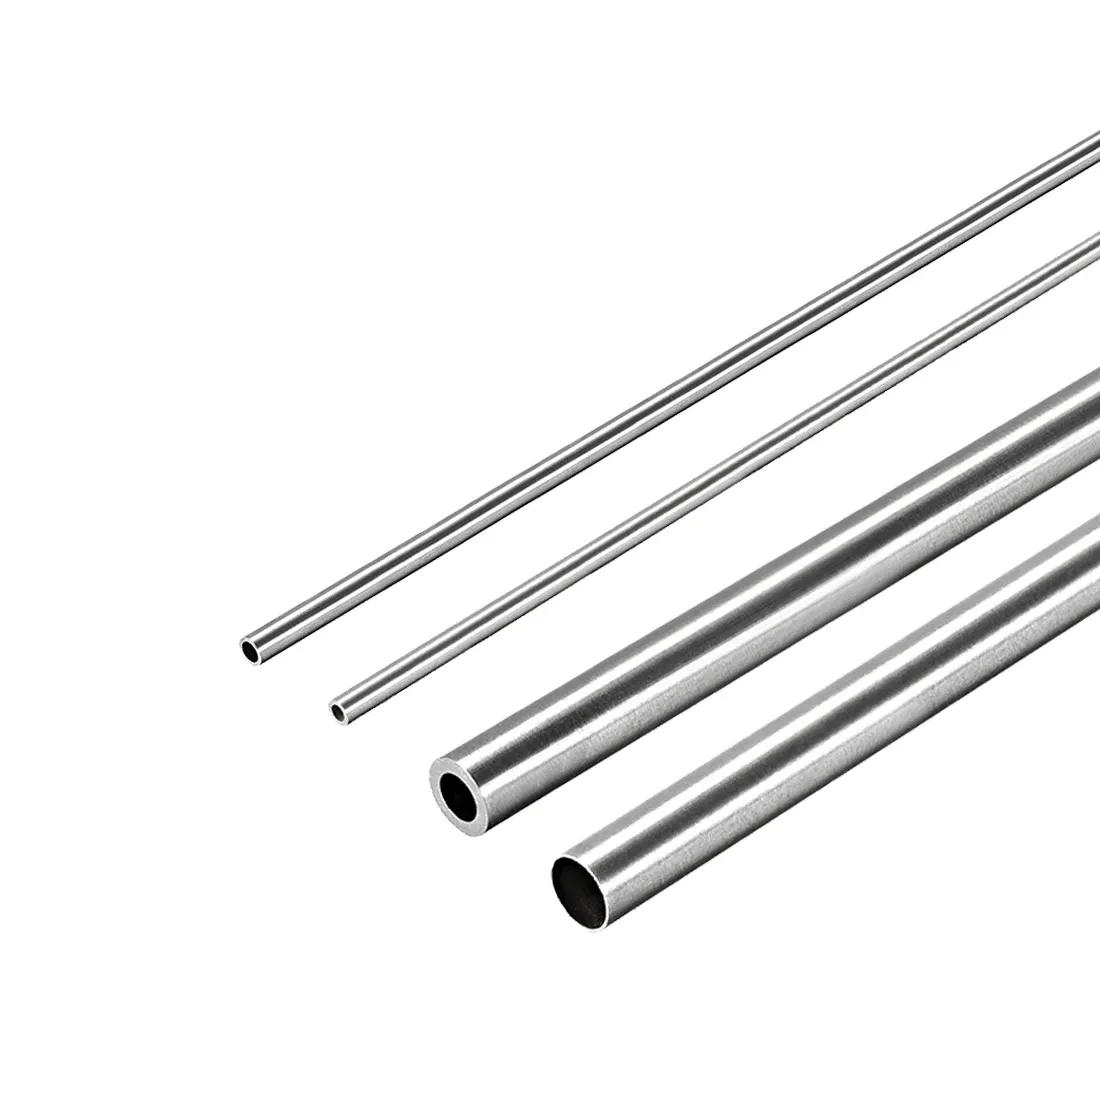 uxcell 1pc 2mm-5mm OD Seamless Straight Pipe Tube 304 Stainless Steel Round Tubing 0.15mm-1mm Wall Thickness 250mm Length